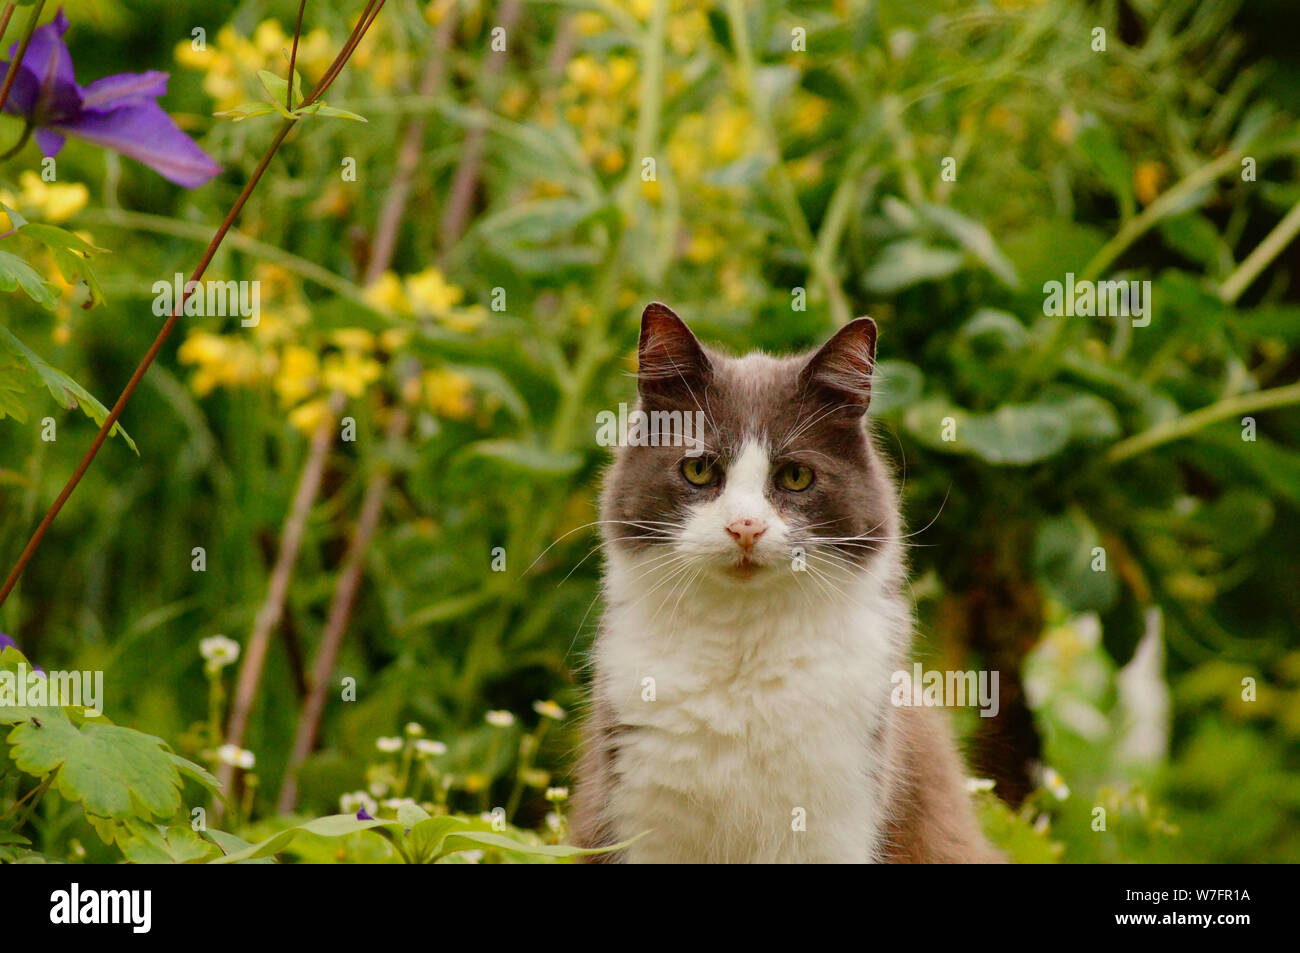 Snorre the cat Stock Photo